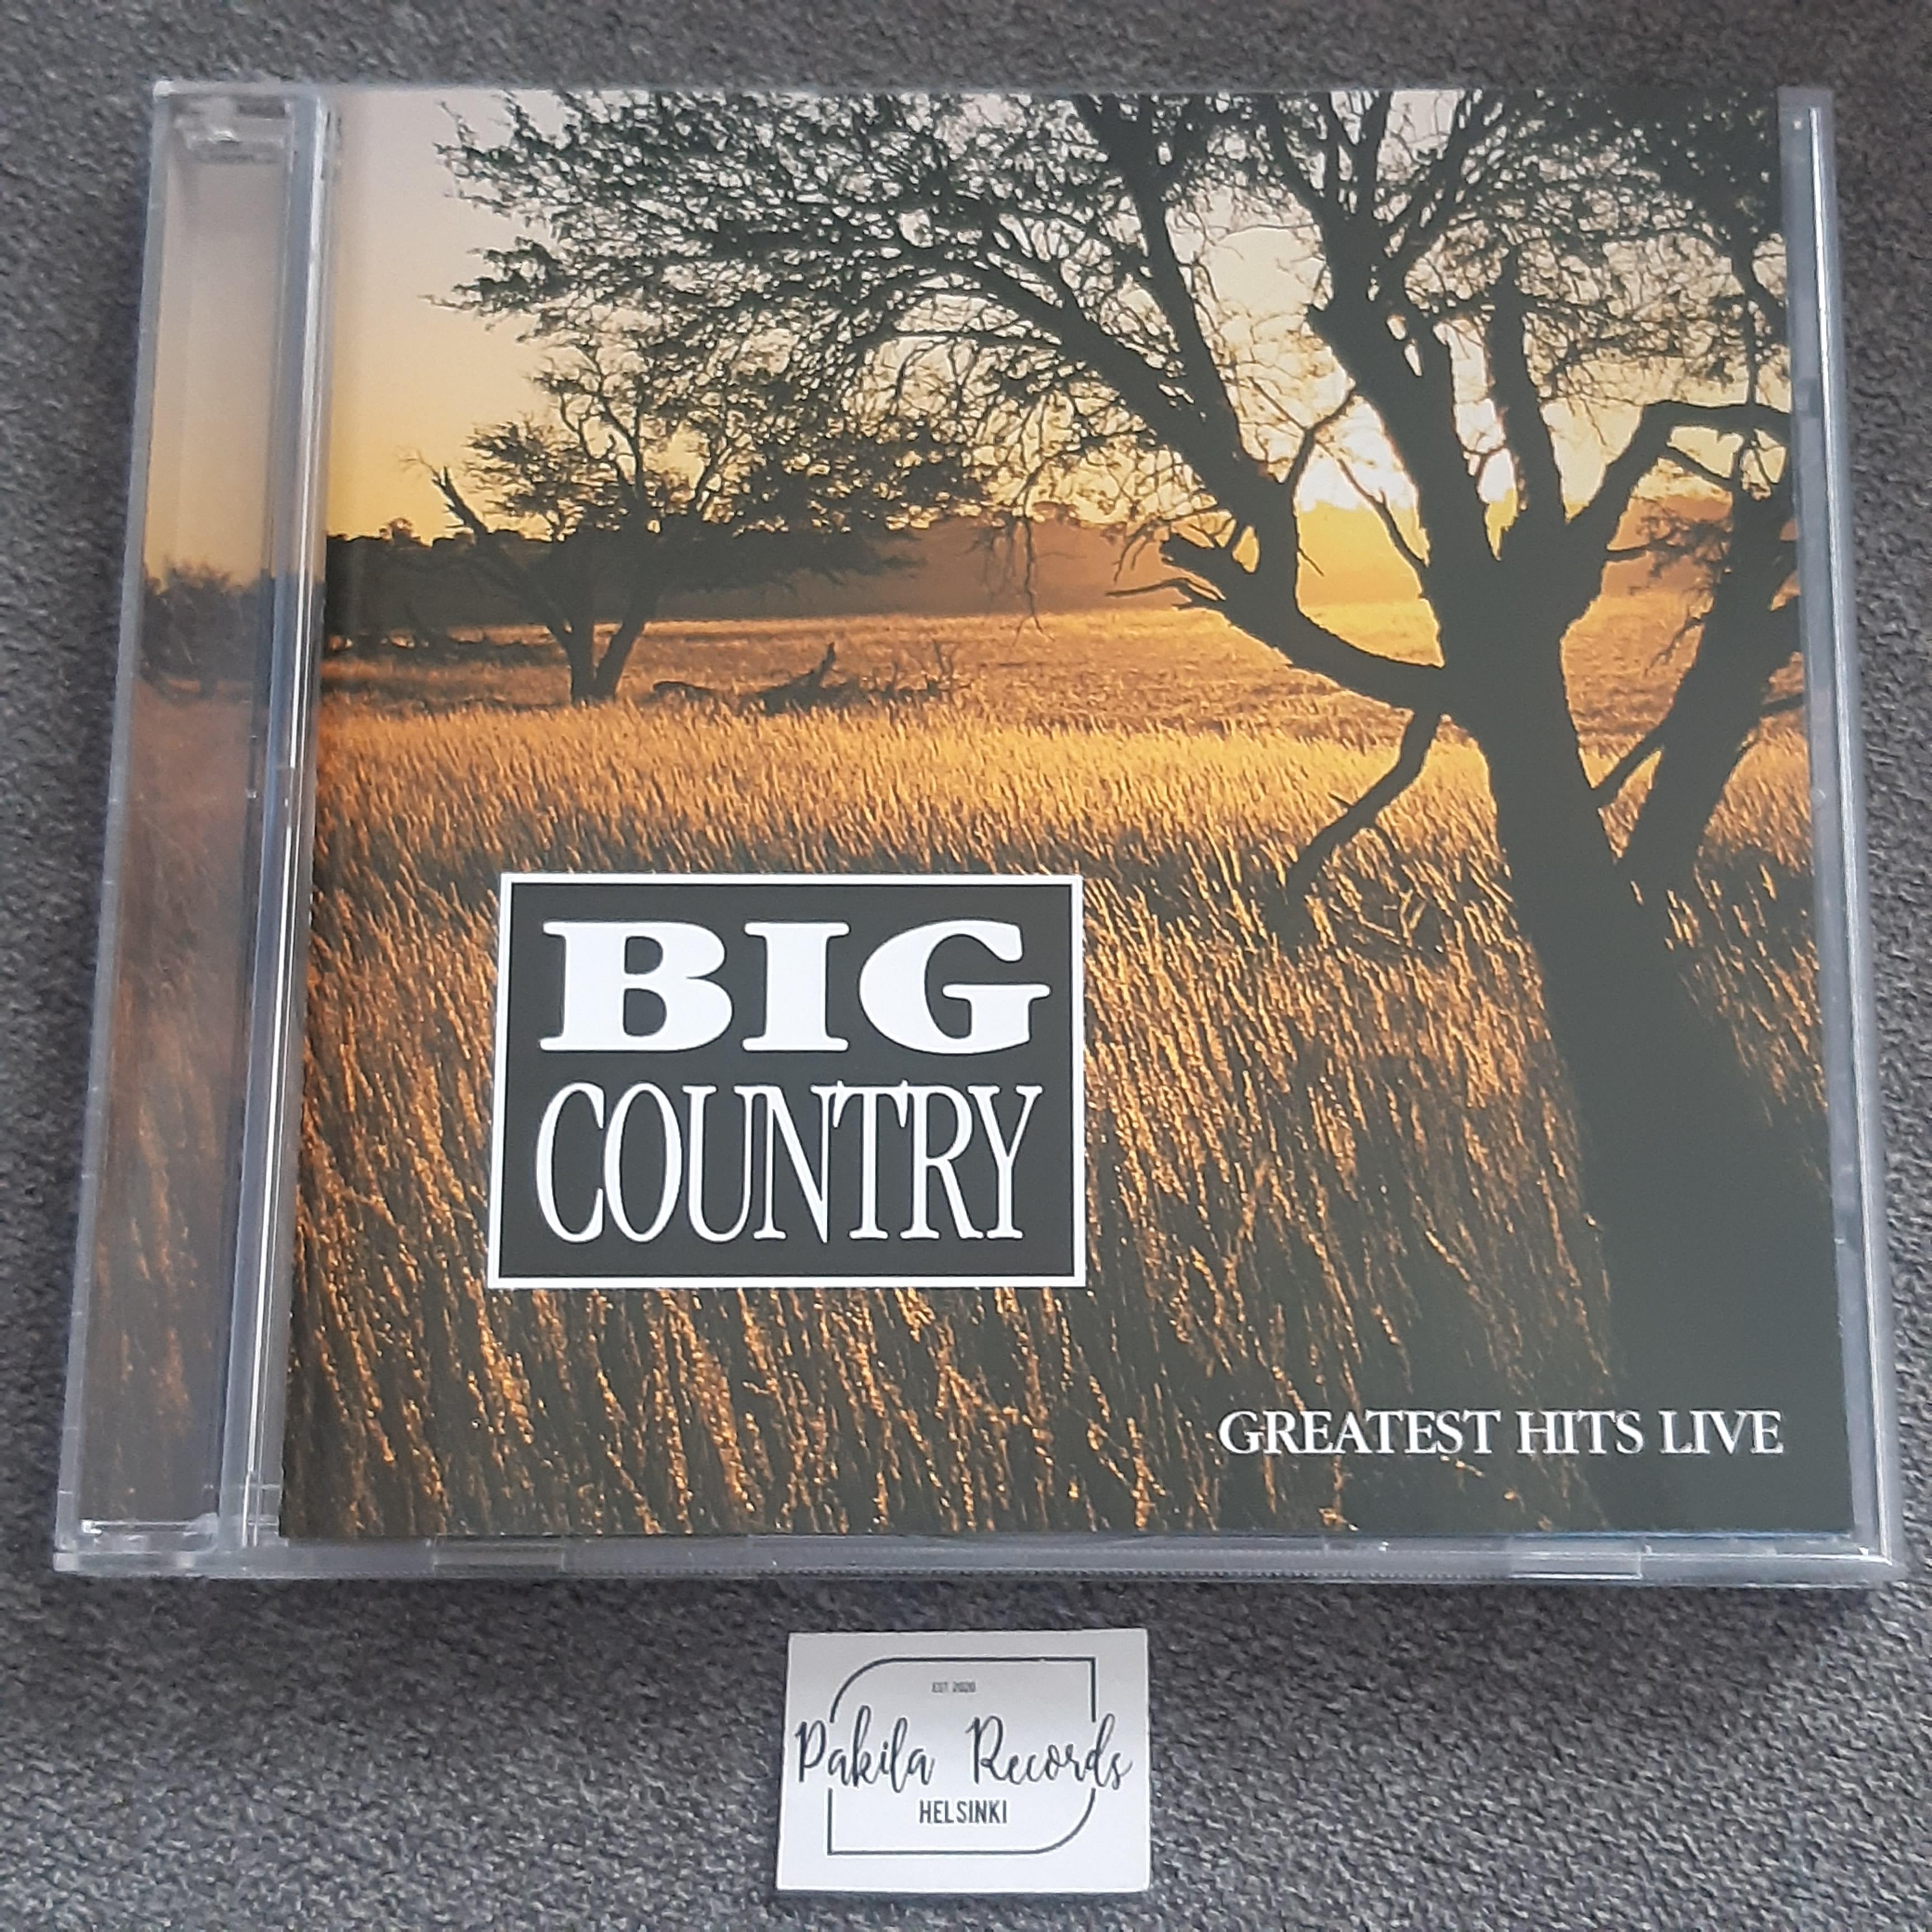 Big Country - Greatest Hits Live - CD (käytetty)